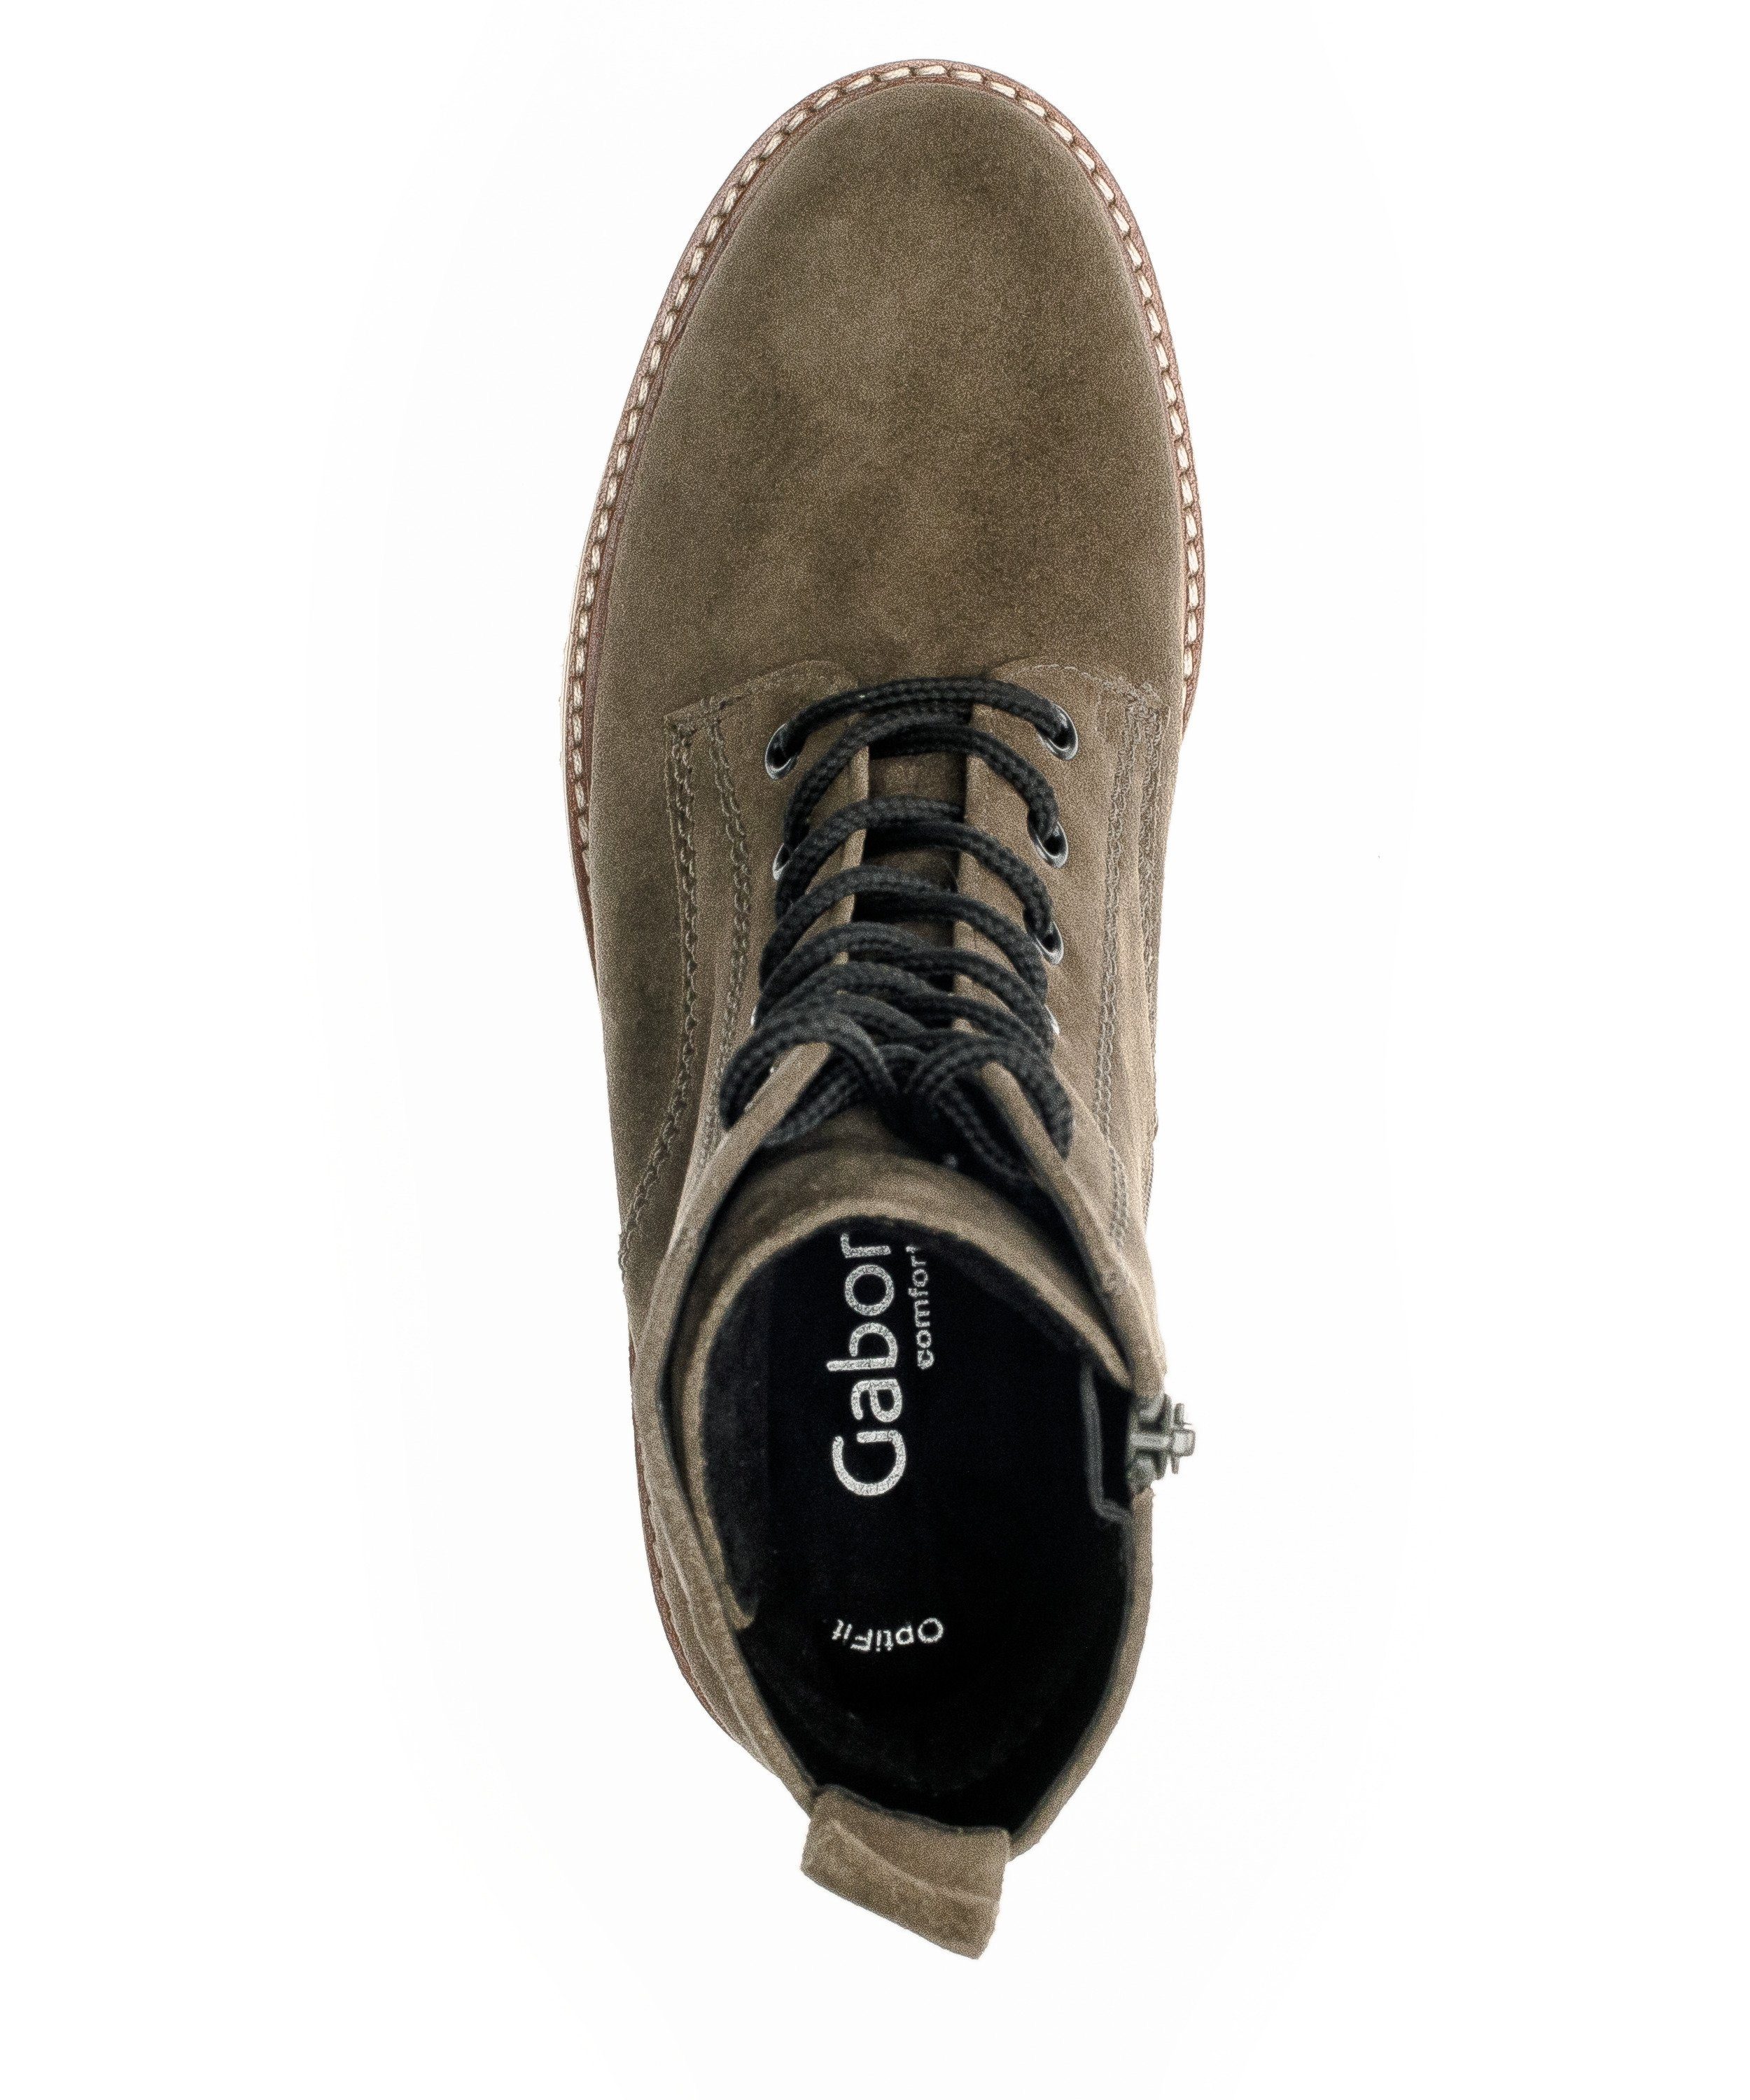 oliv (Micro) Chelseaboots Gabor Comfort